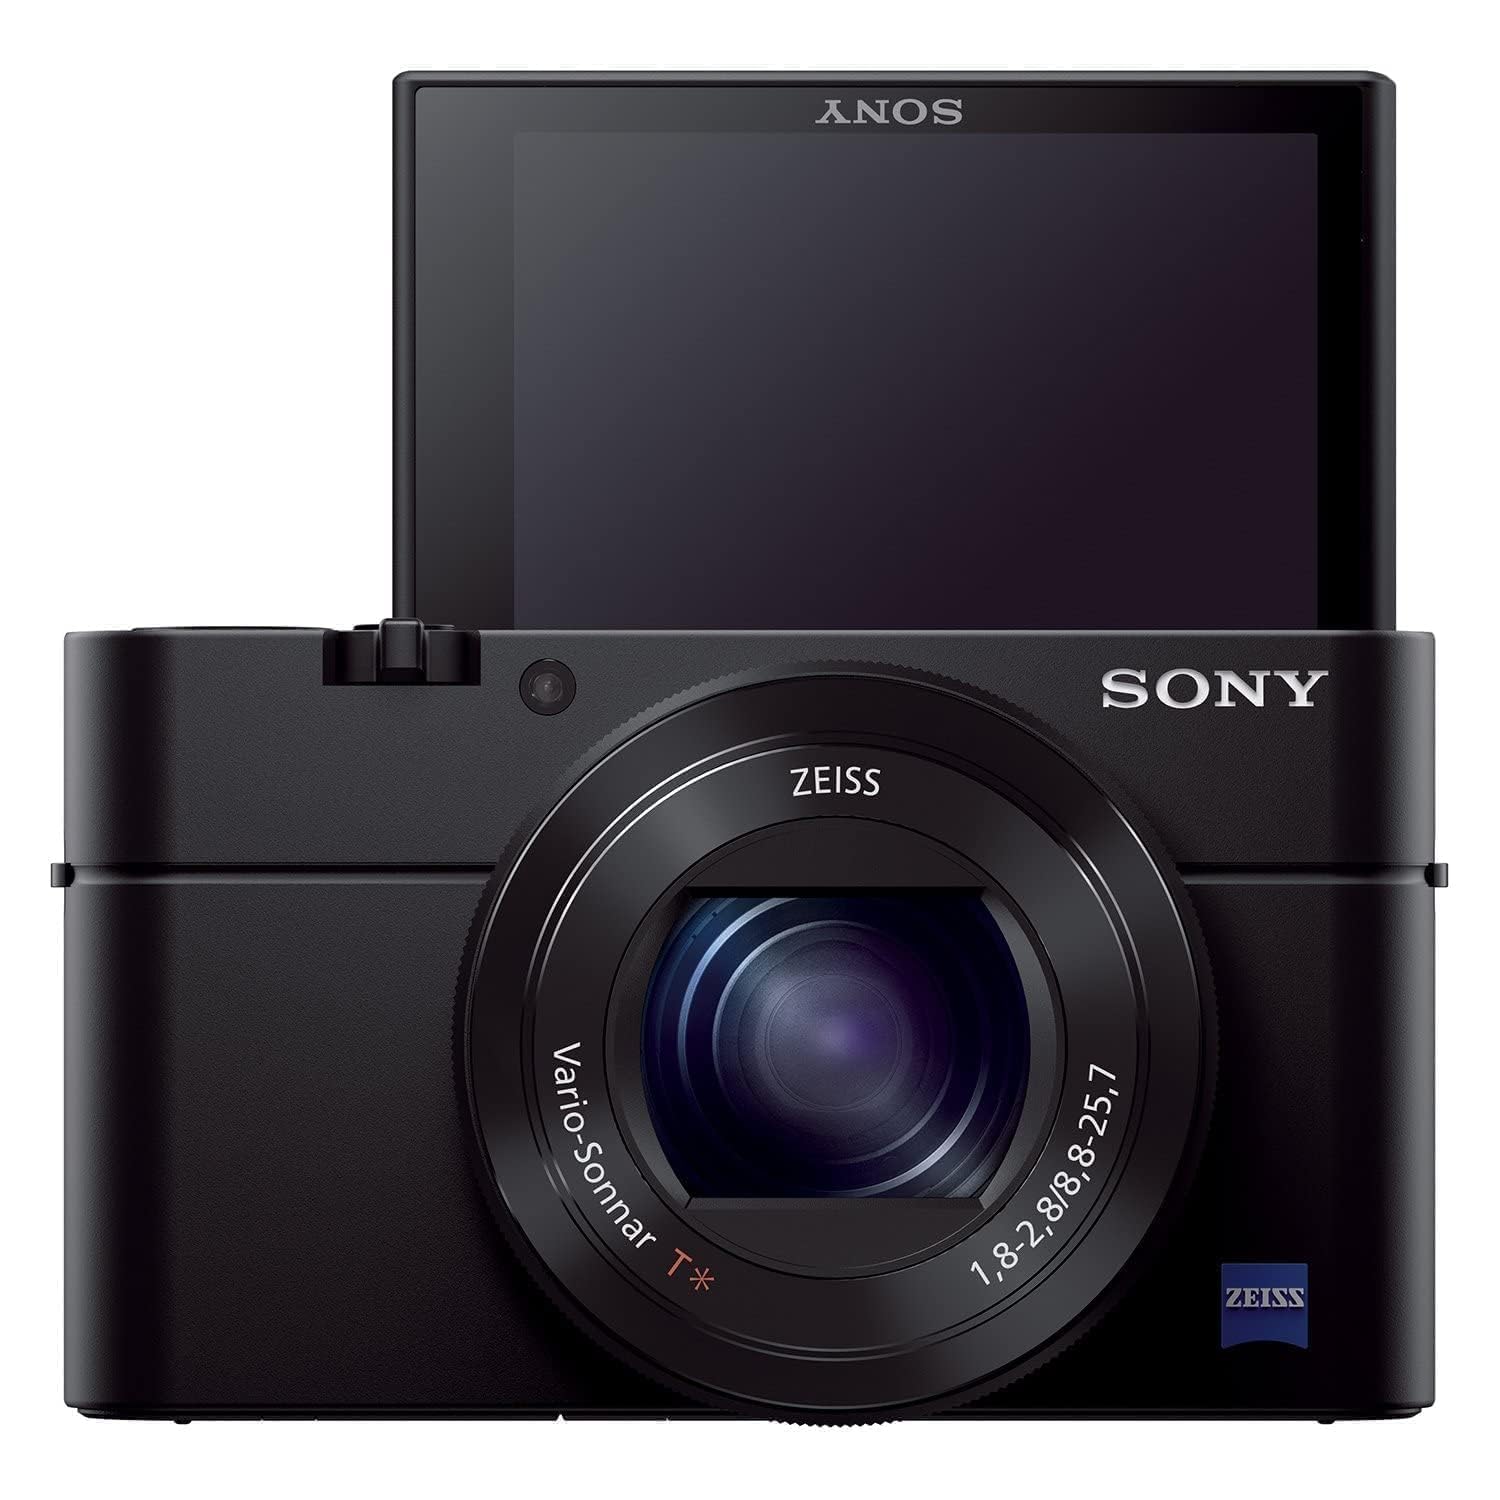 Sony RX100 III 20.1 MP Premium Compact Digital Camera w/1-inch Sensor and 24-70mm F1.8-2.8 ZEISS Zoom Lens (DSCRX100M3/B), 6in l x 4.65in w x 2.93in h, Black